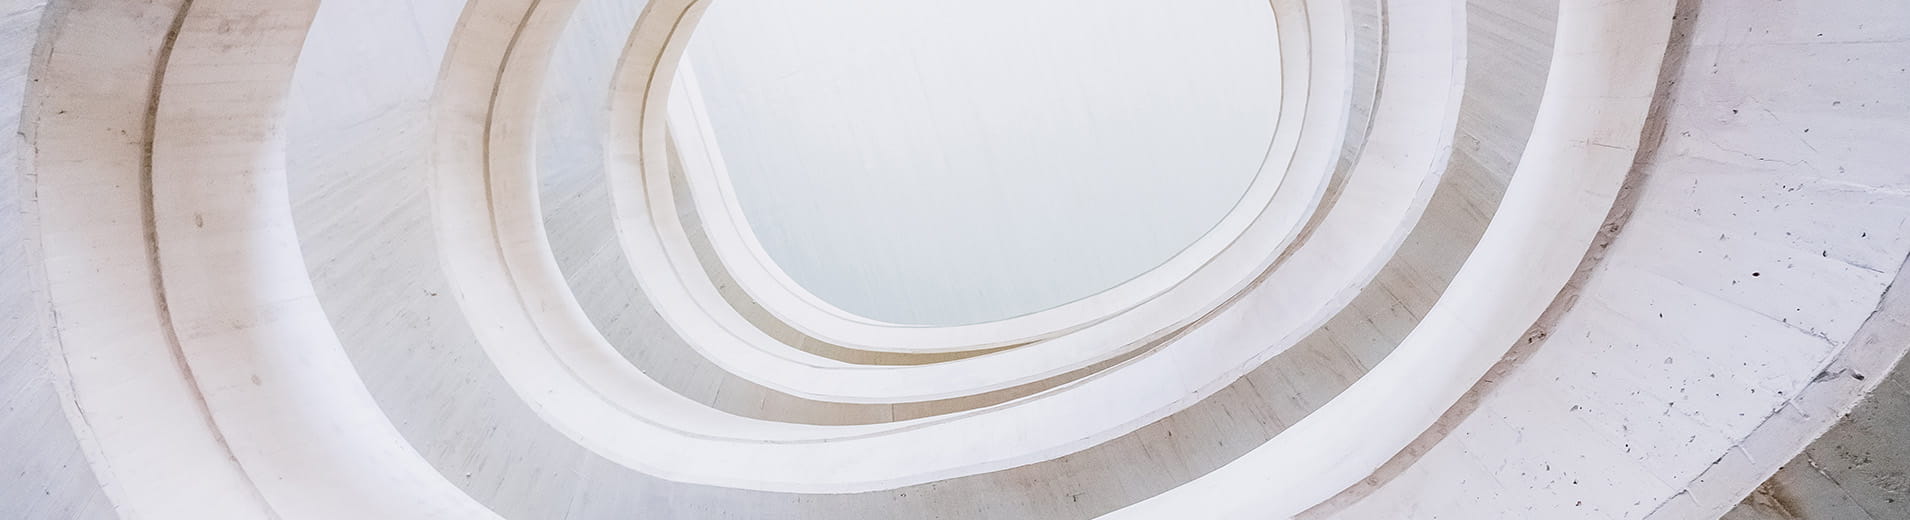 Architectural_Curved_Lines_P_1070_1910x520